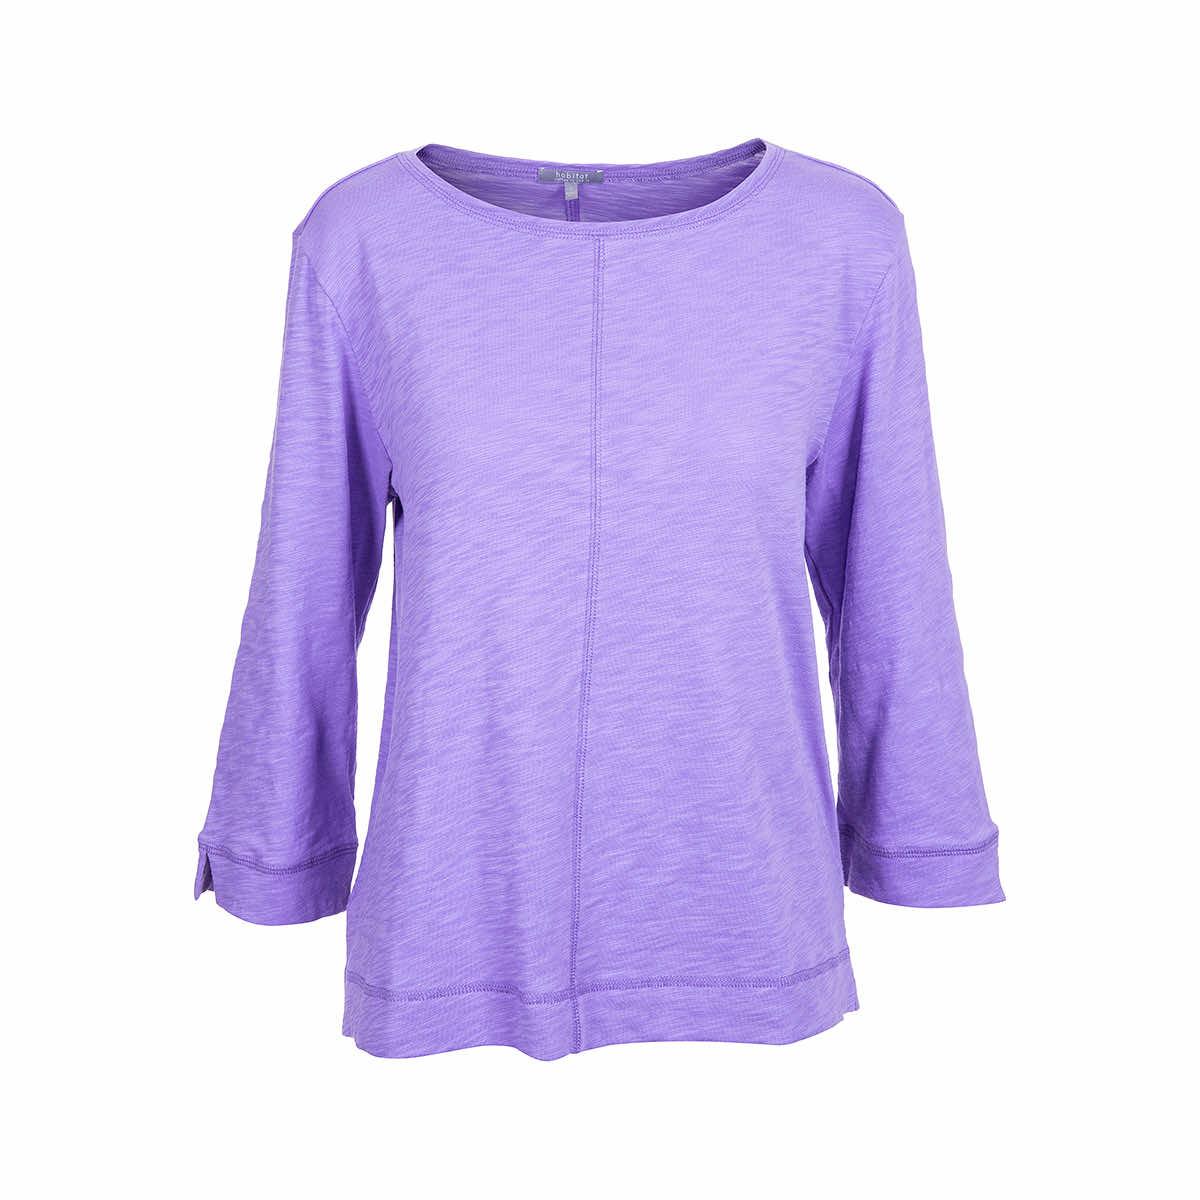 Mast General Store | Women's Coverstitch Boatneck Top